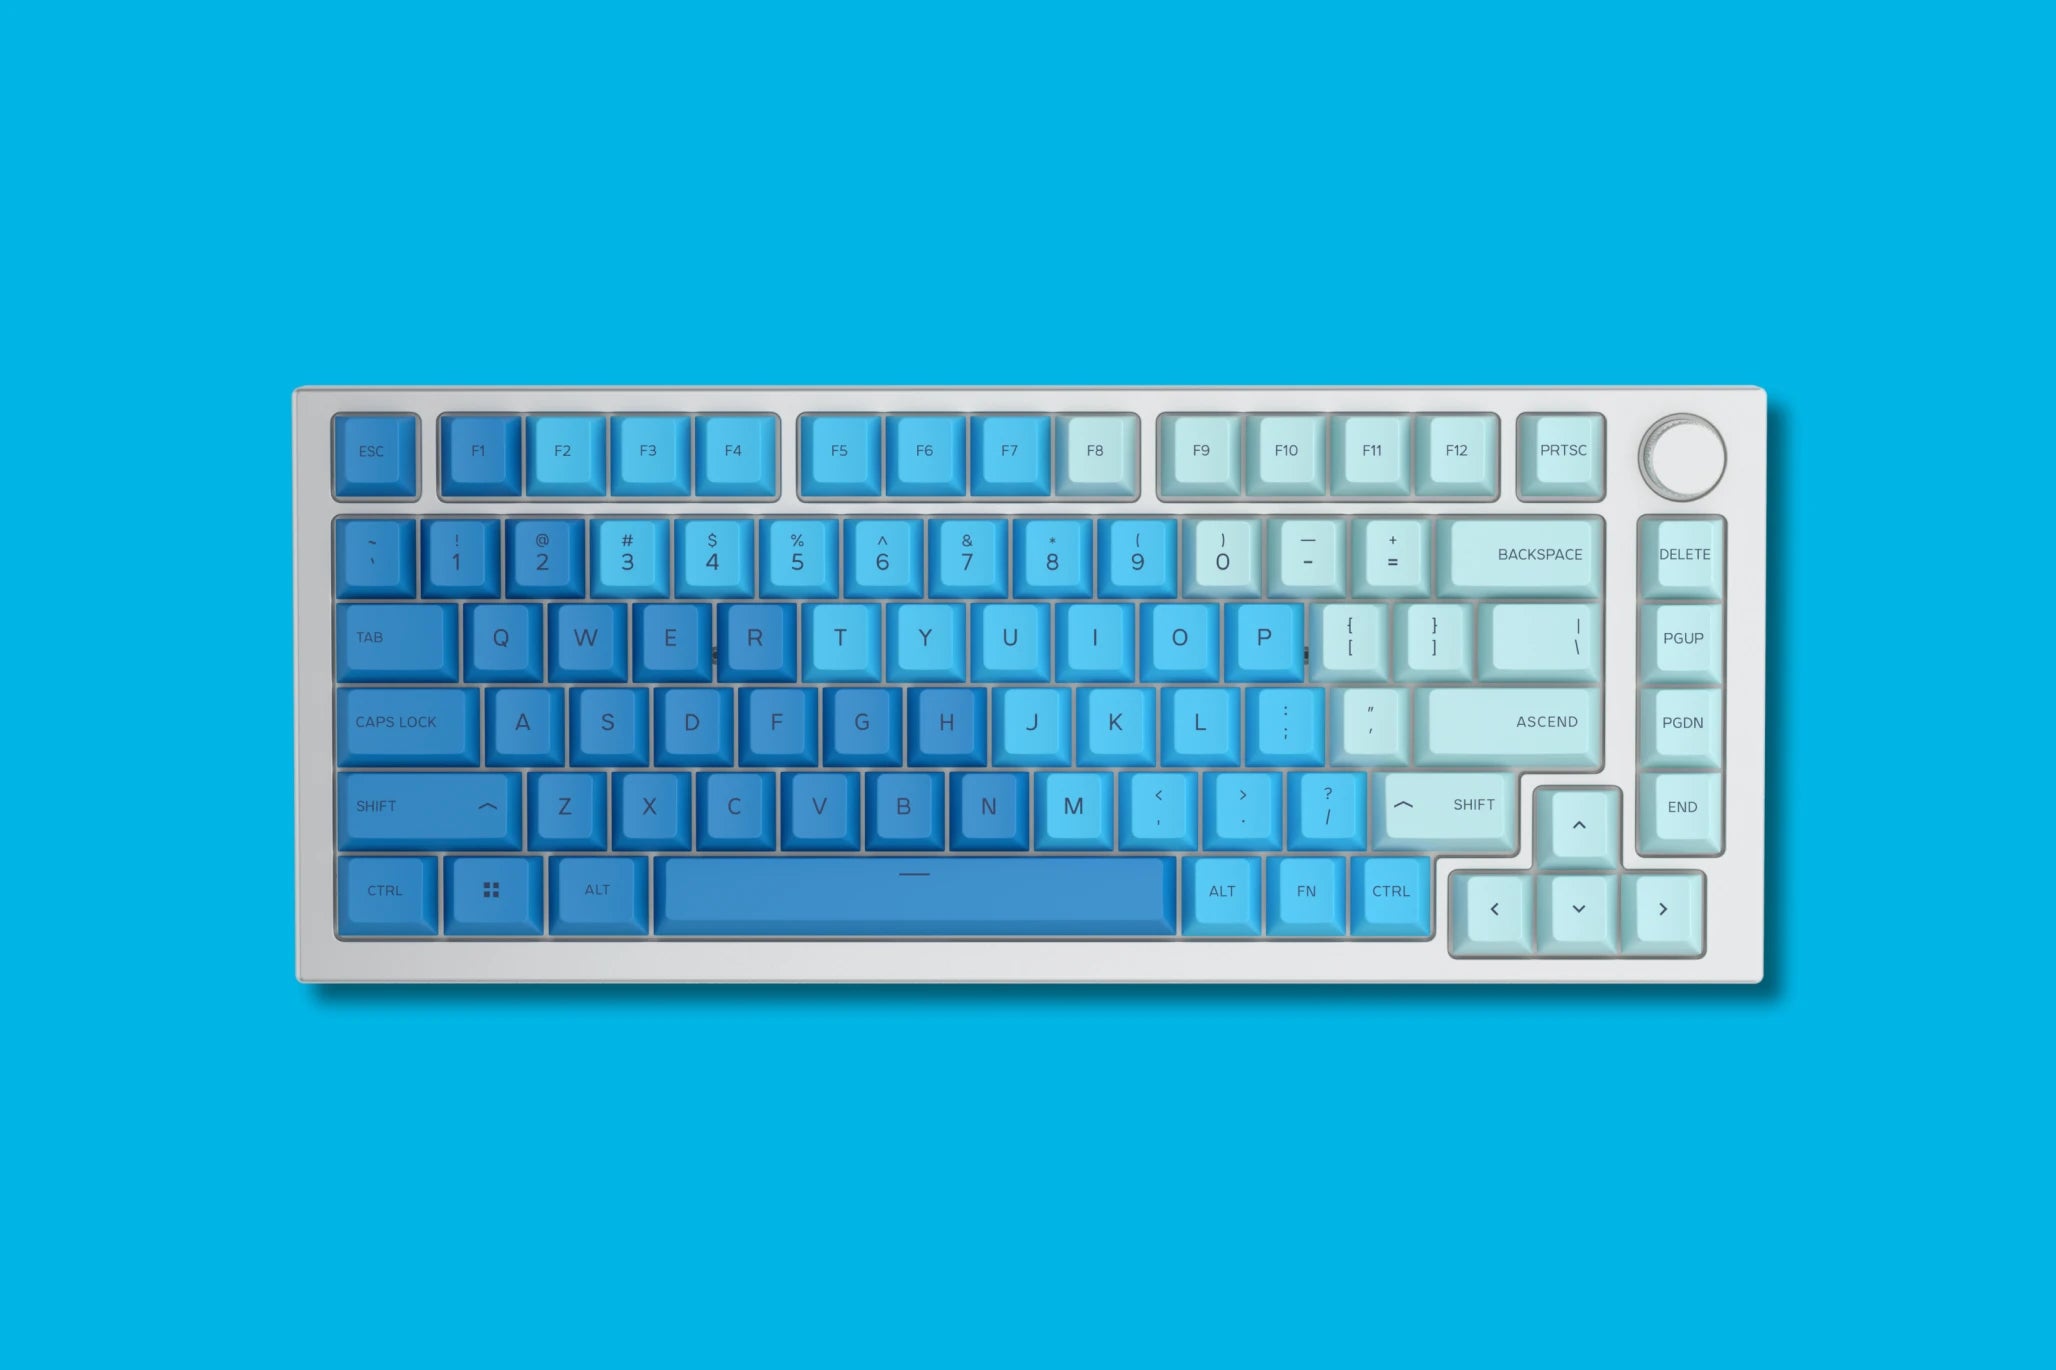 GPBT Ocean keycaps on a White Ice GMMK PRO keyboard on a blue background